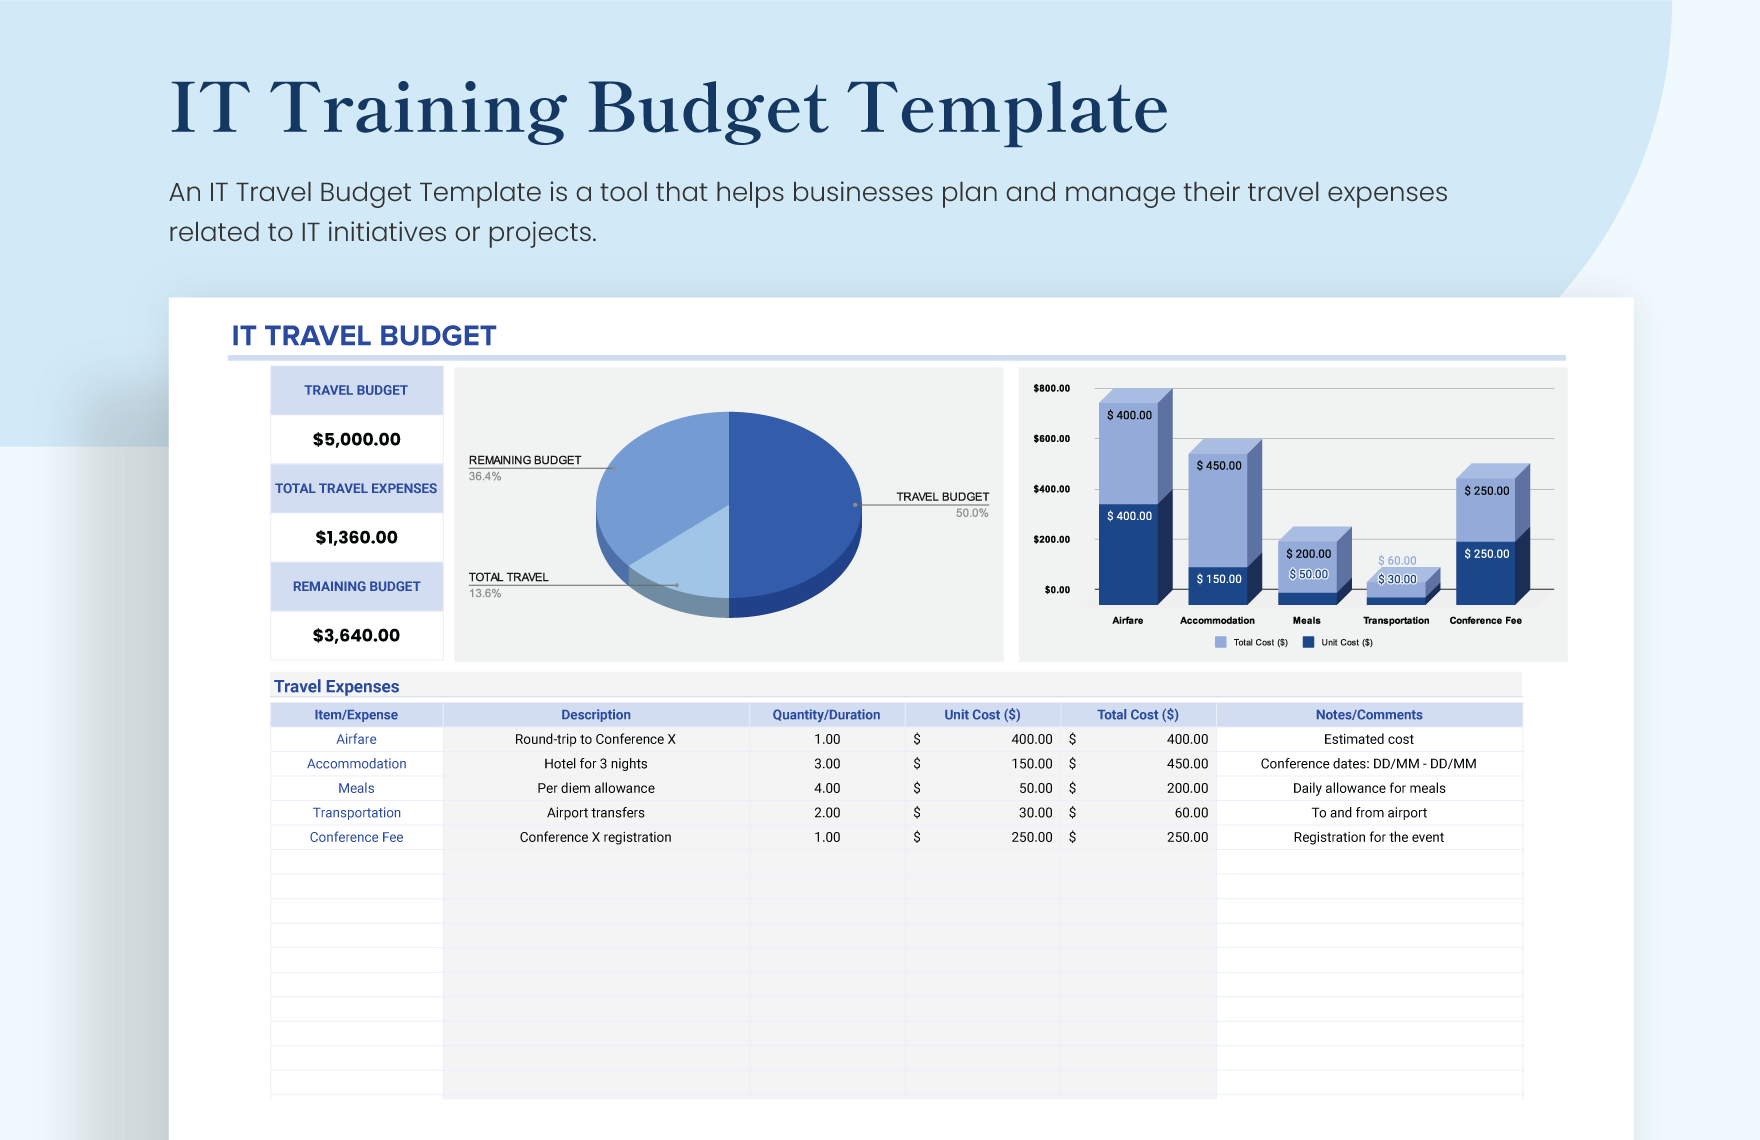 IT Travel Budget Template